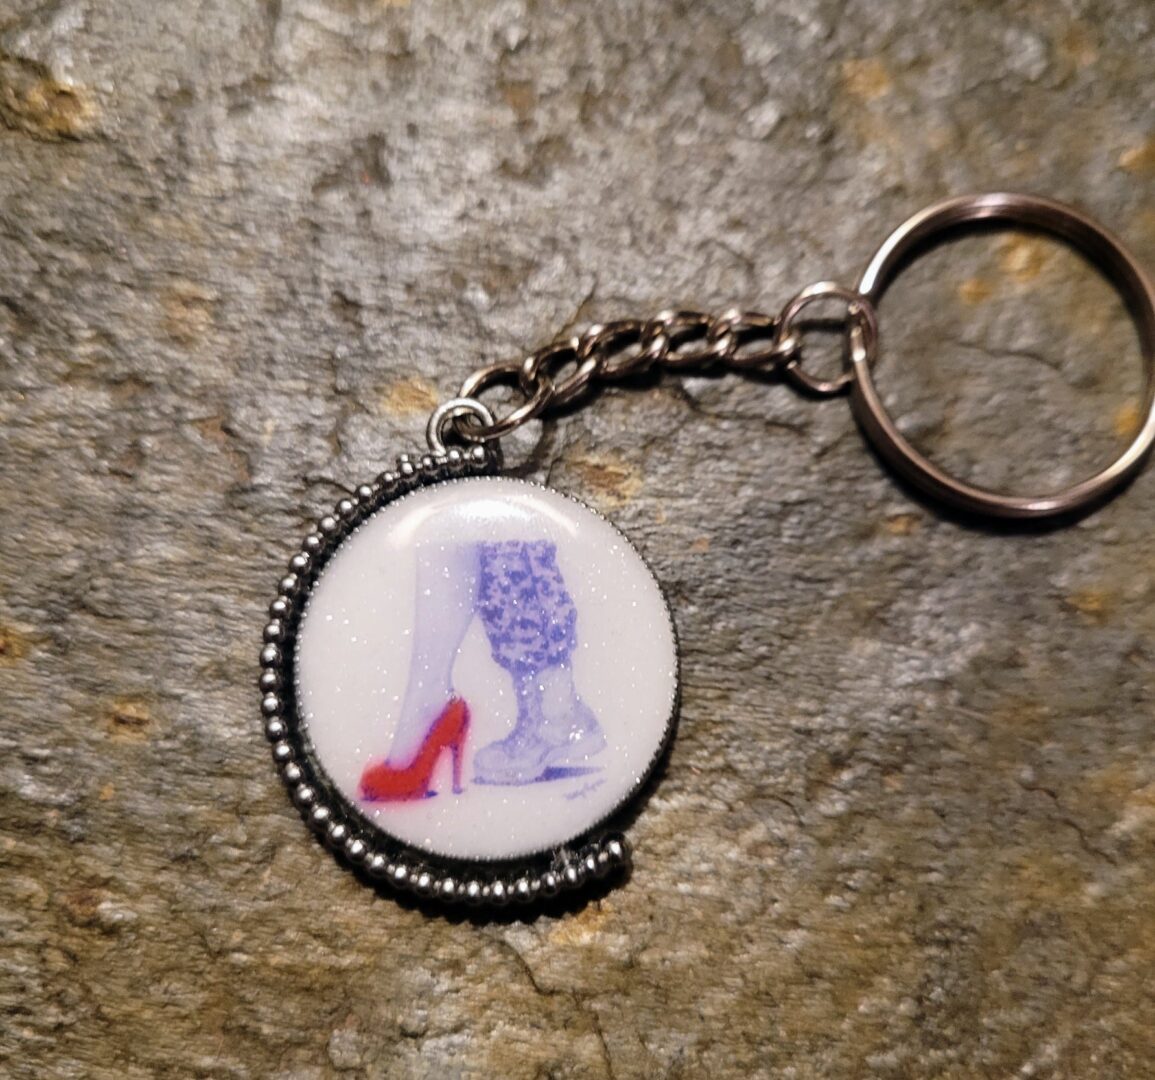 A keychain with a picture of a woman 's shoe.